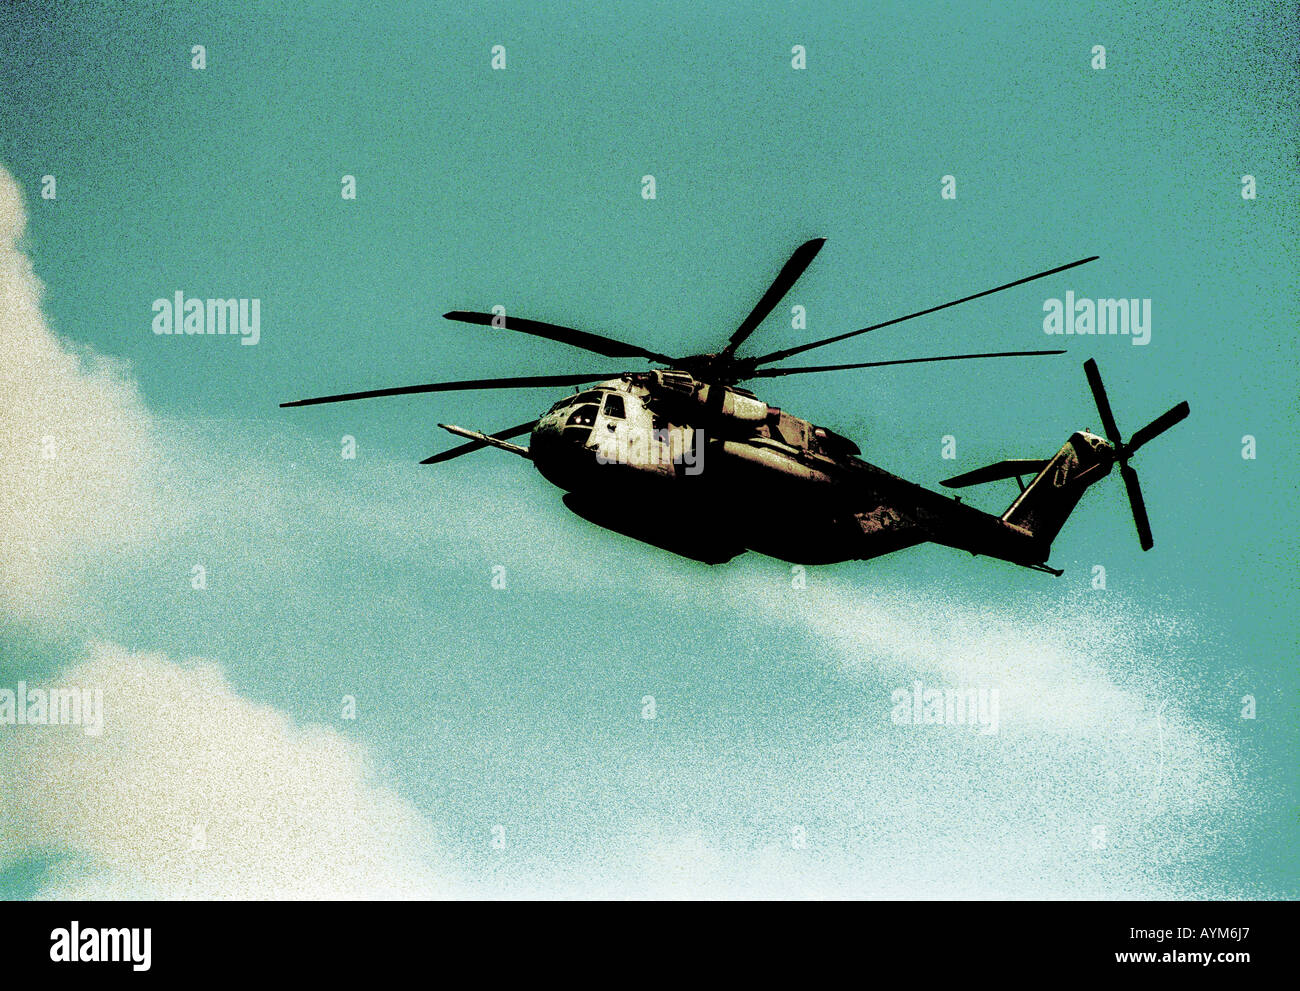 Sikorsky S-65 military helicopter Stock Photo